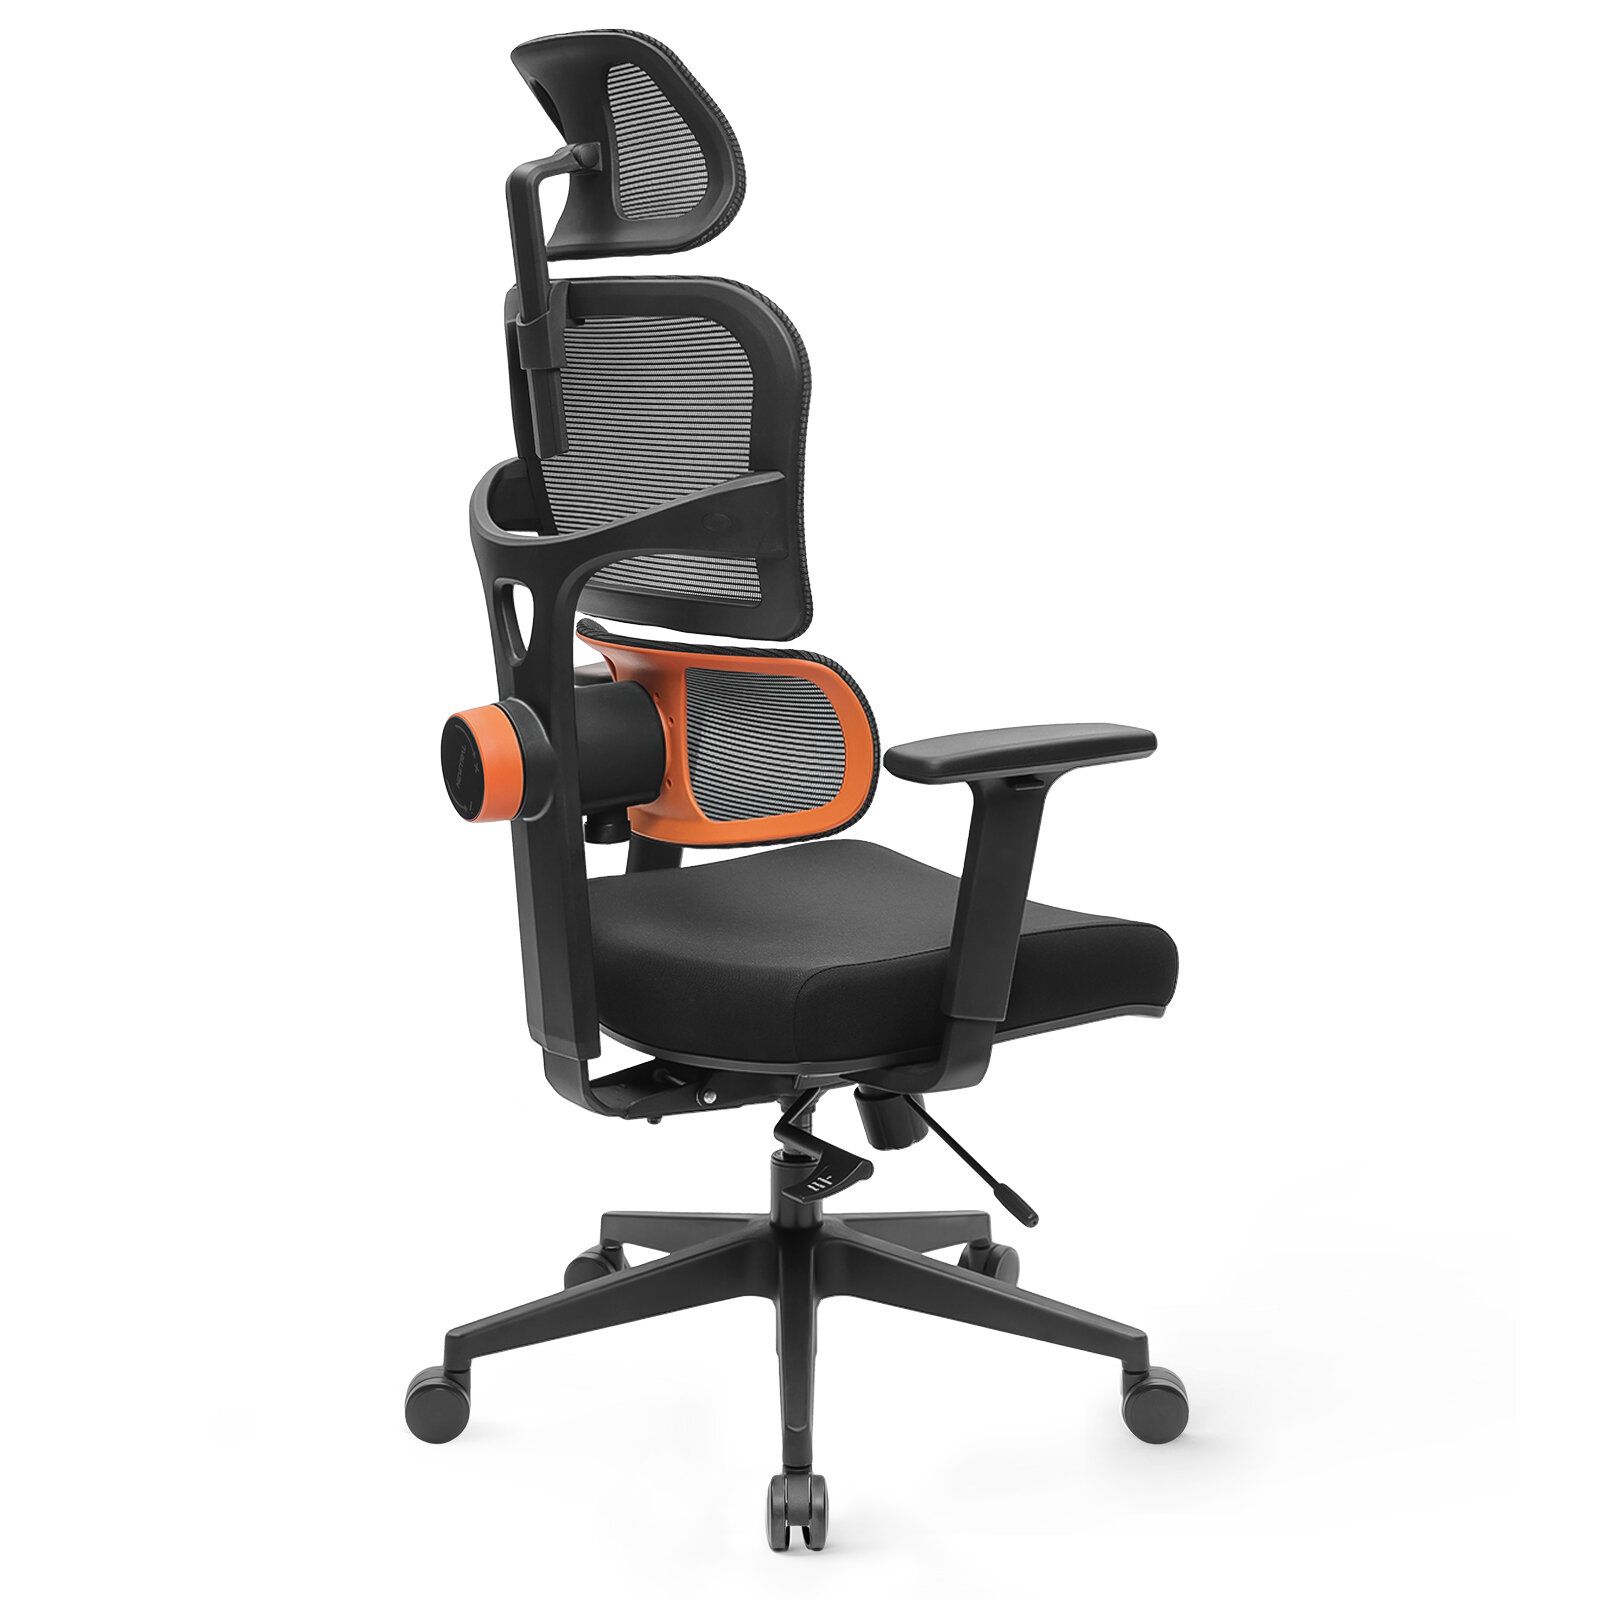 Image of [Standard Version] NEWTRAL Ergonomic Office Chair High Back Desk Chair with Unique Adjustable Lumbar Support Adjustable